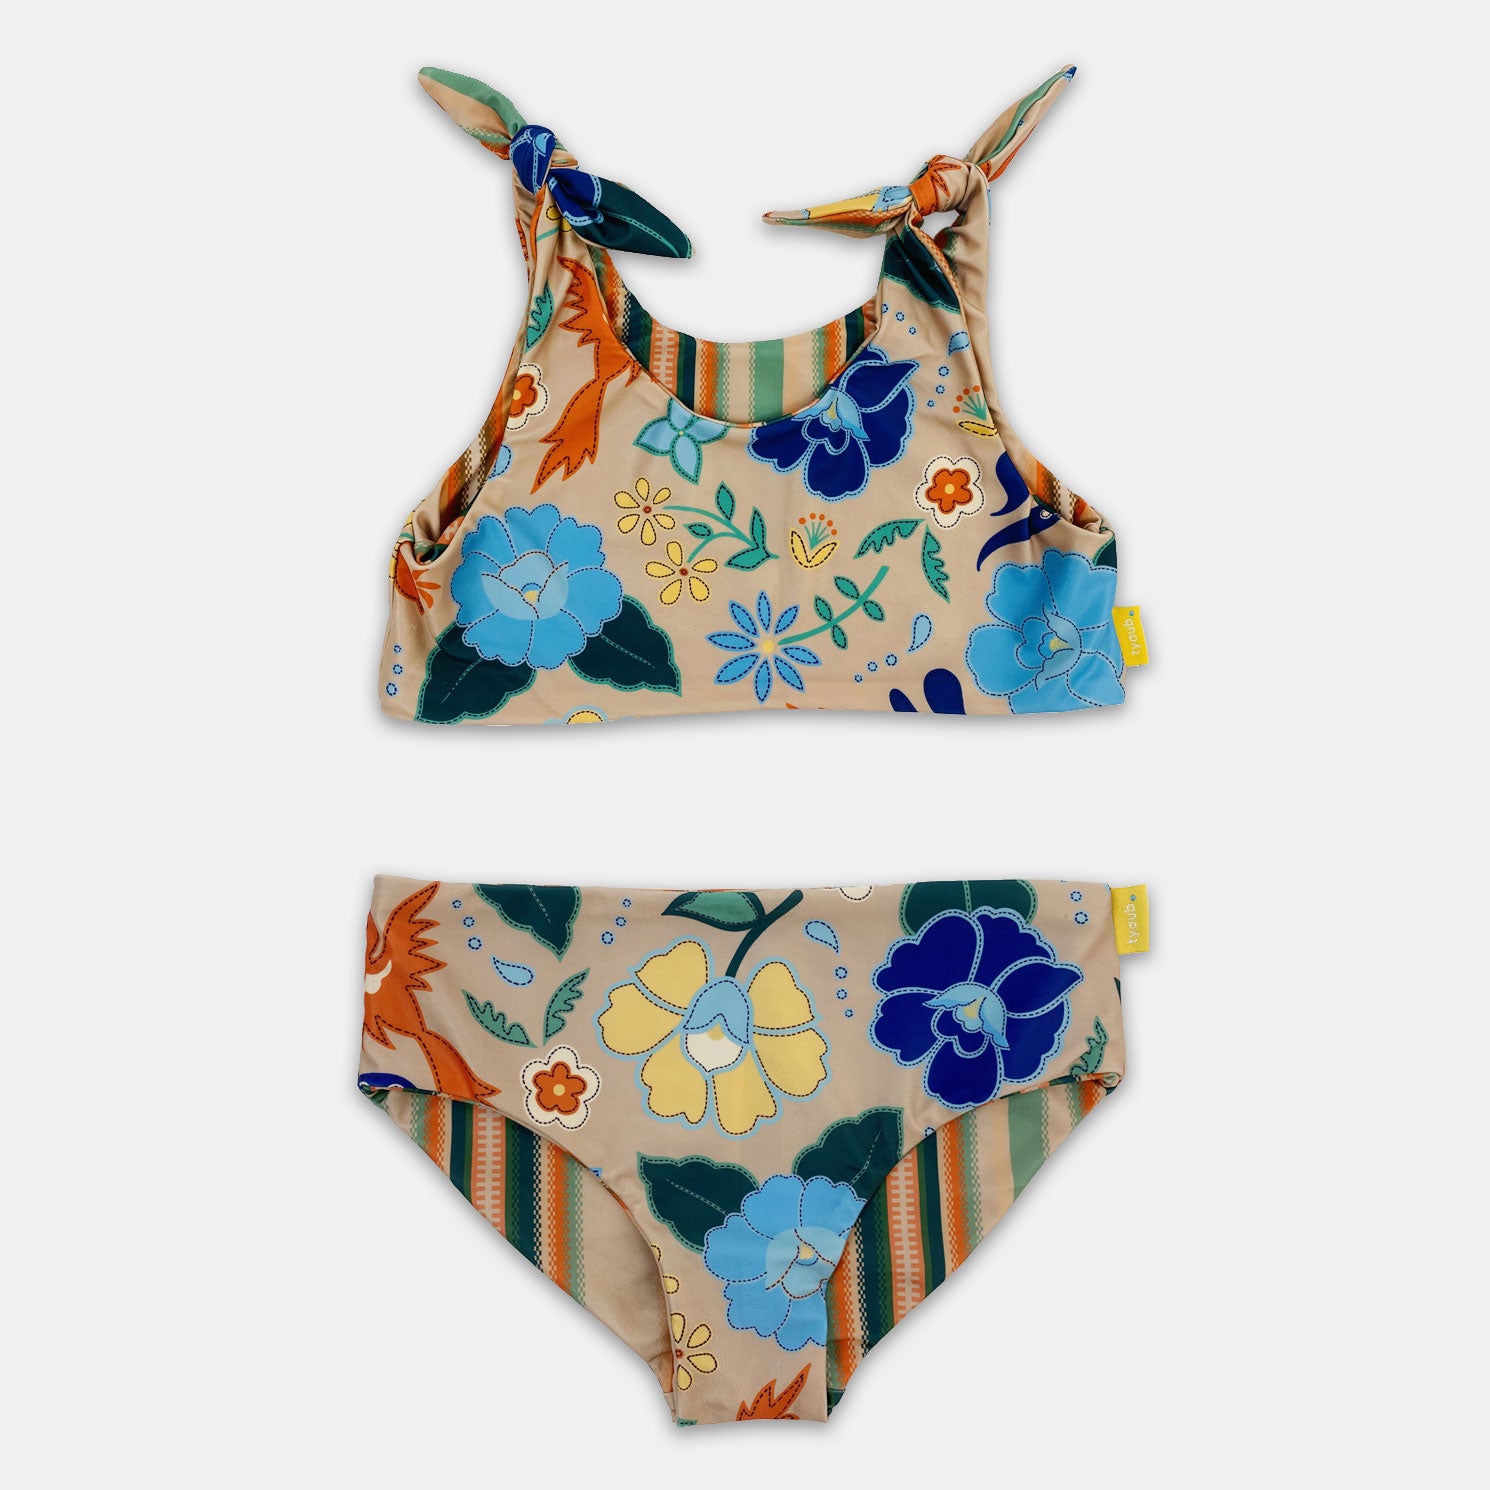 Two piece reversible bikini. Crop top style with bow ties on the shoulder straps, classic fit bikini brief. Super comfortable and secure style. Side 1 is a floral bird print and side 2 is a brown, orange and cream serape stripe. Can be worn on both sides or mixed and matched as you like.